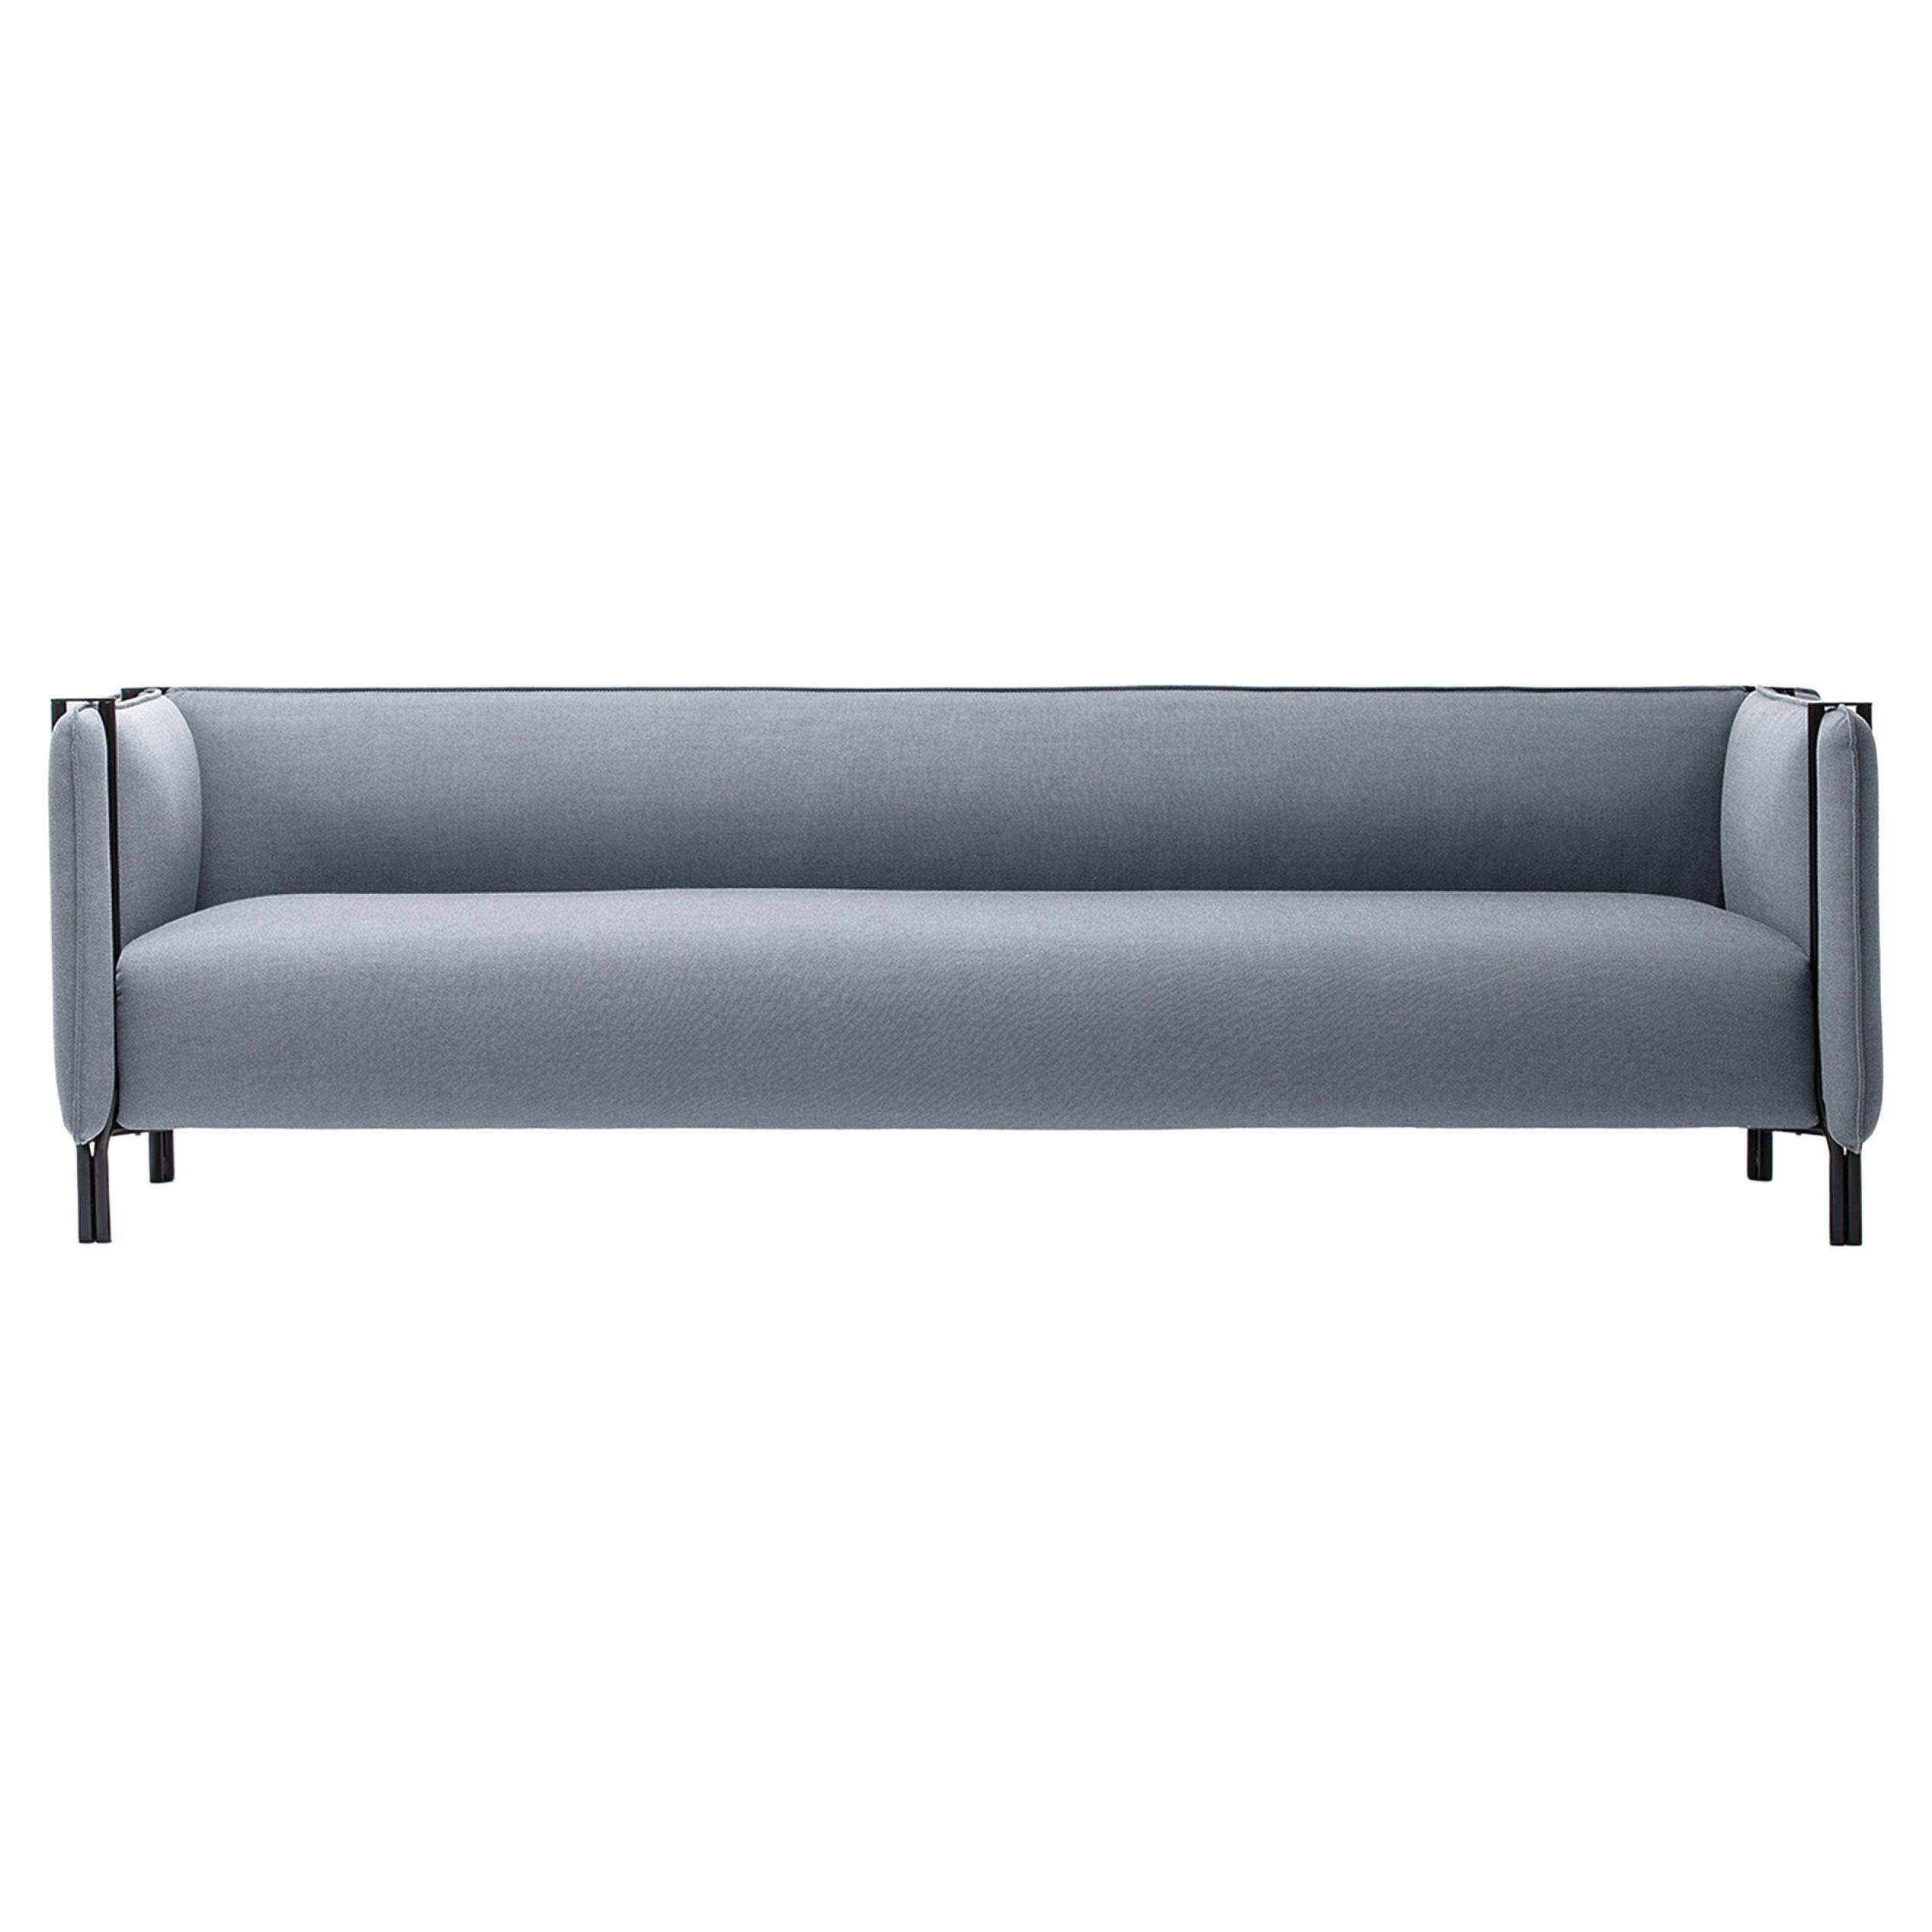 Pinch 3 Seater Sofa in Comfort Upholstery with Pitch Black Base by Skrivo Design For Sale